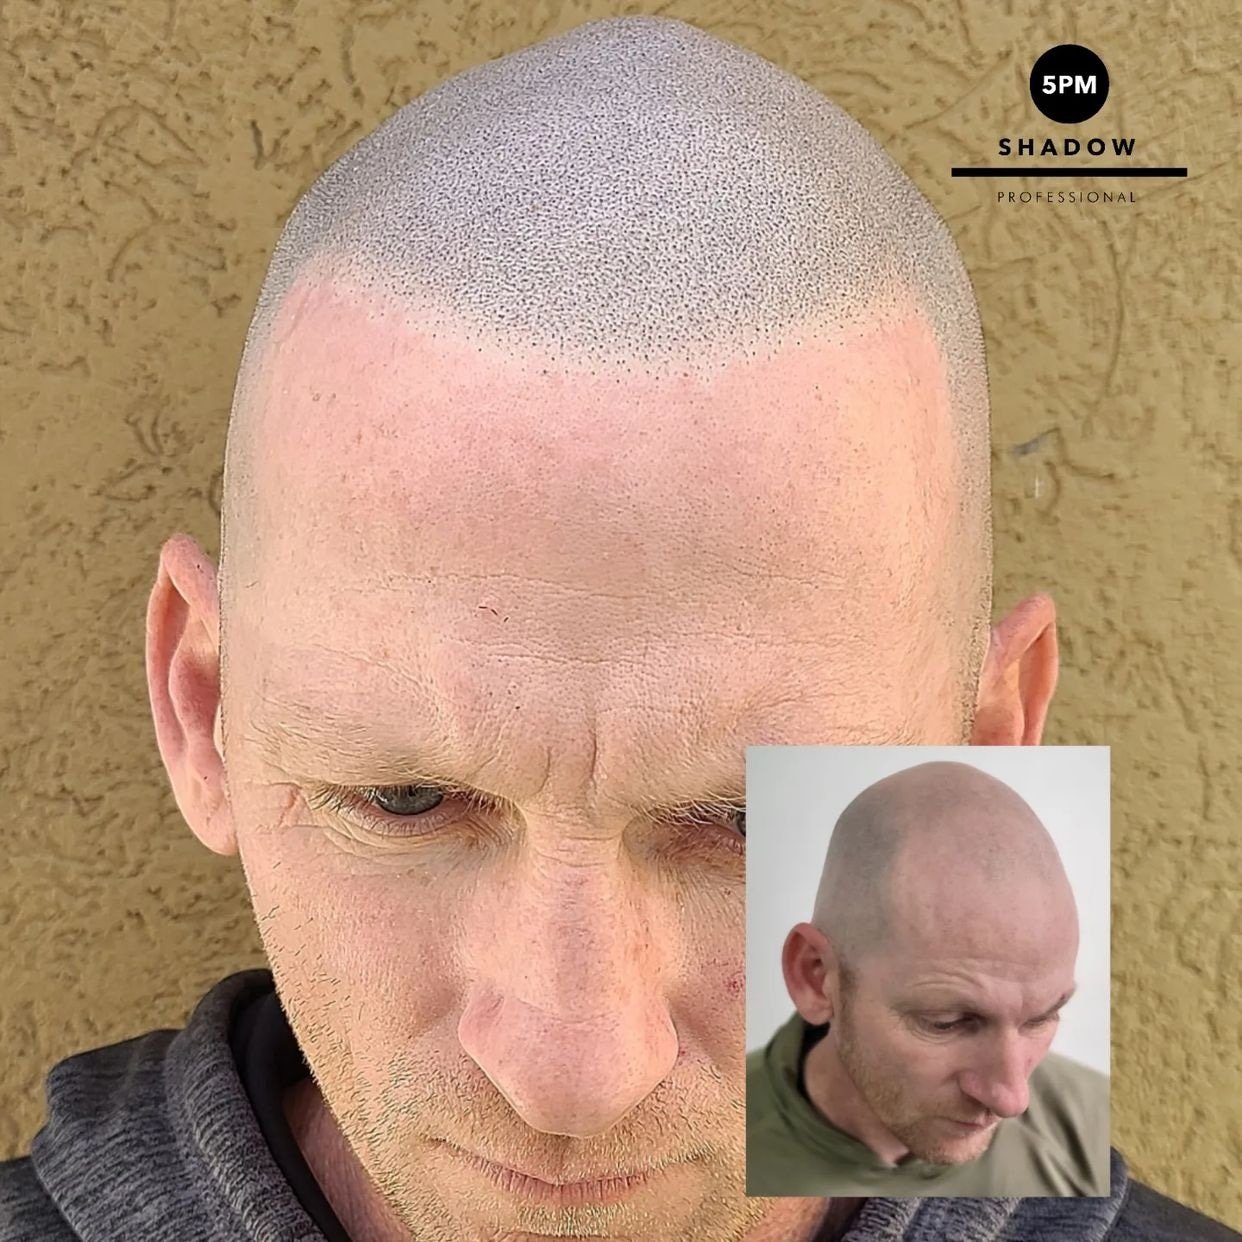 Scalp Culture - ⚡️⚡️HAIR TATTOO RESULTS - SCALP MICROPIGMENTATION  @scalpculture Always natural results for our clients🚀 ⠀ SMP IS A COSMETIC HAIR  TATTOO - For all types of hair loss ✓ 📍We